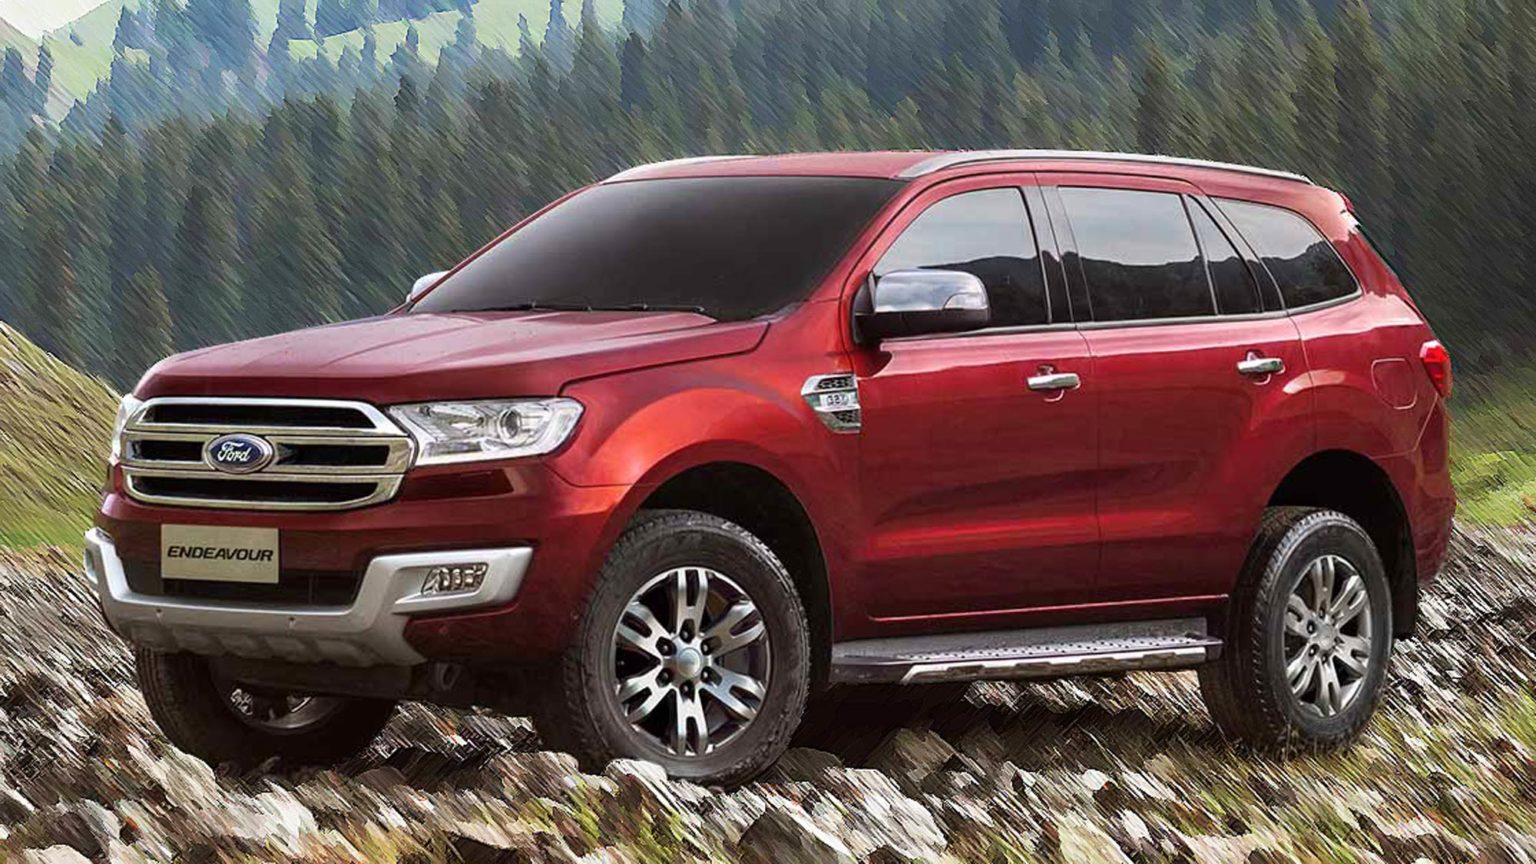 Ford Endeavour To Replace Previous Engine With Latest 2.3 litre Petrol